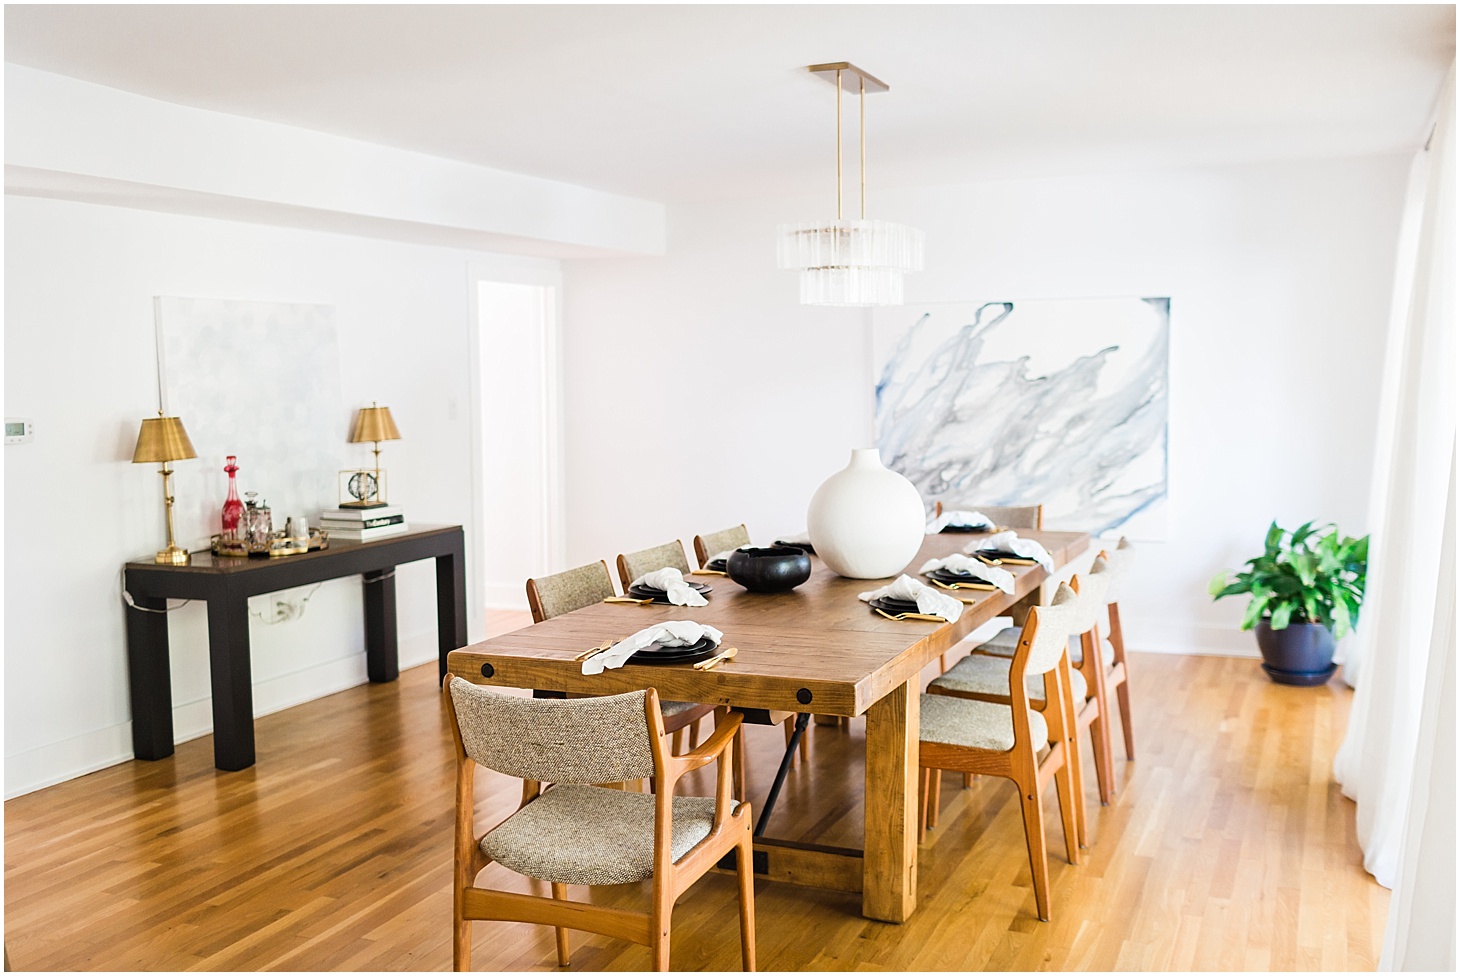 Modern Dining Room Inspiration | Home Tour | Curated Mid-Century Modern Home in Washington DC | Sarah Bradshaw Photography